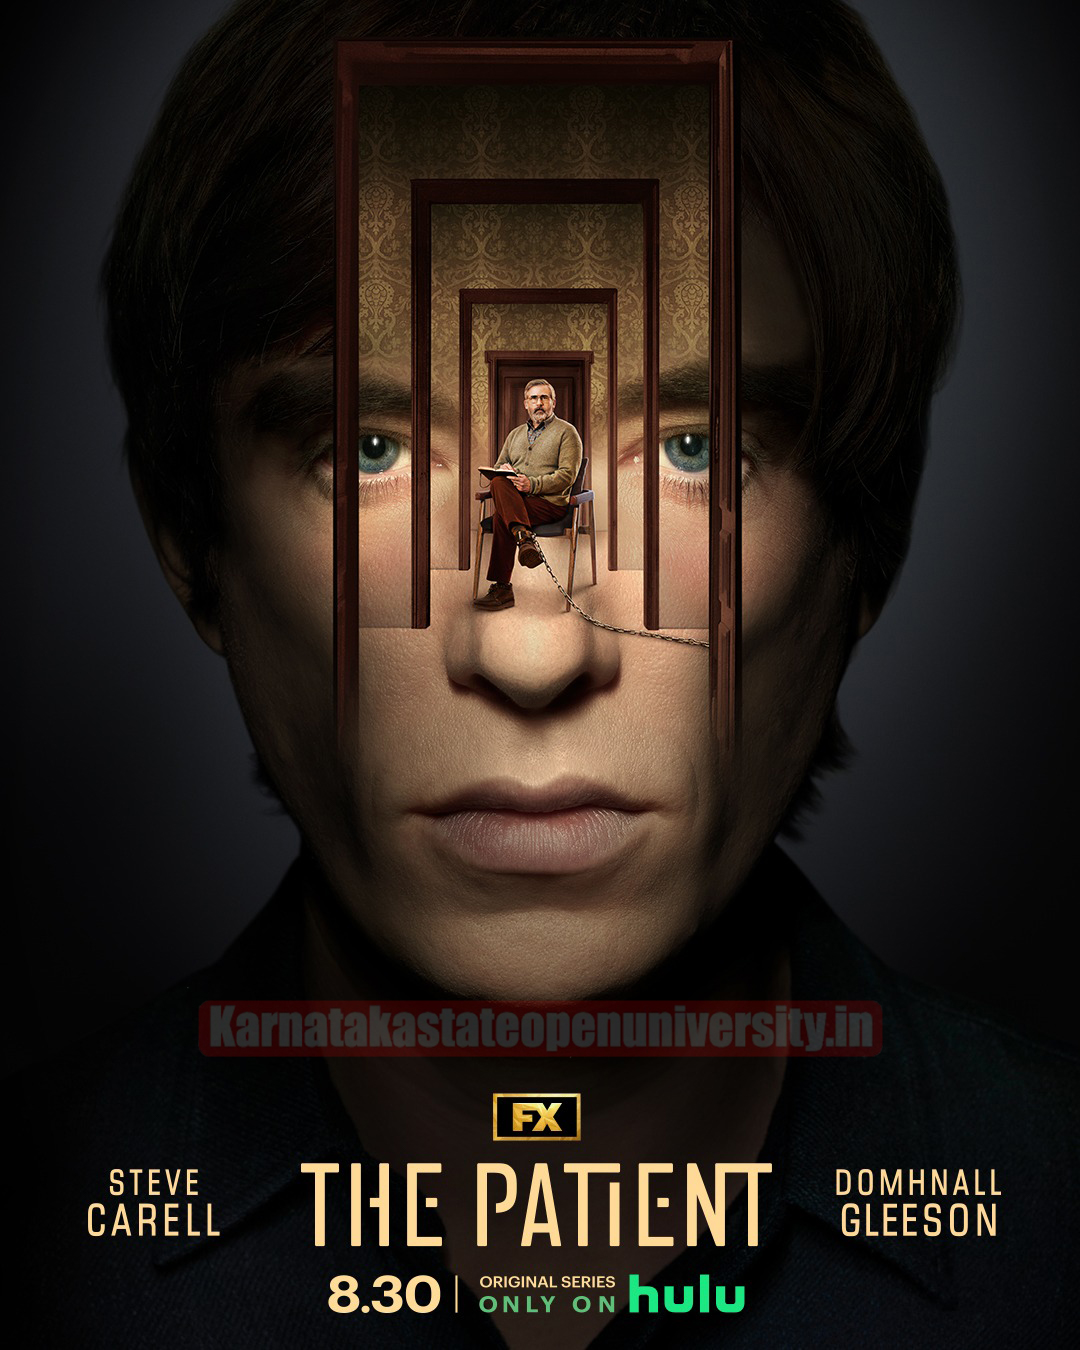 The Patient Release Date